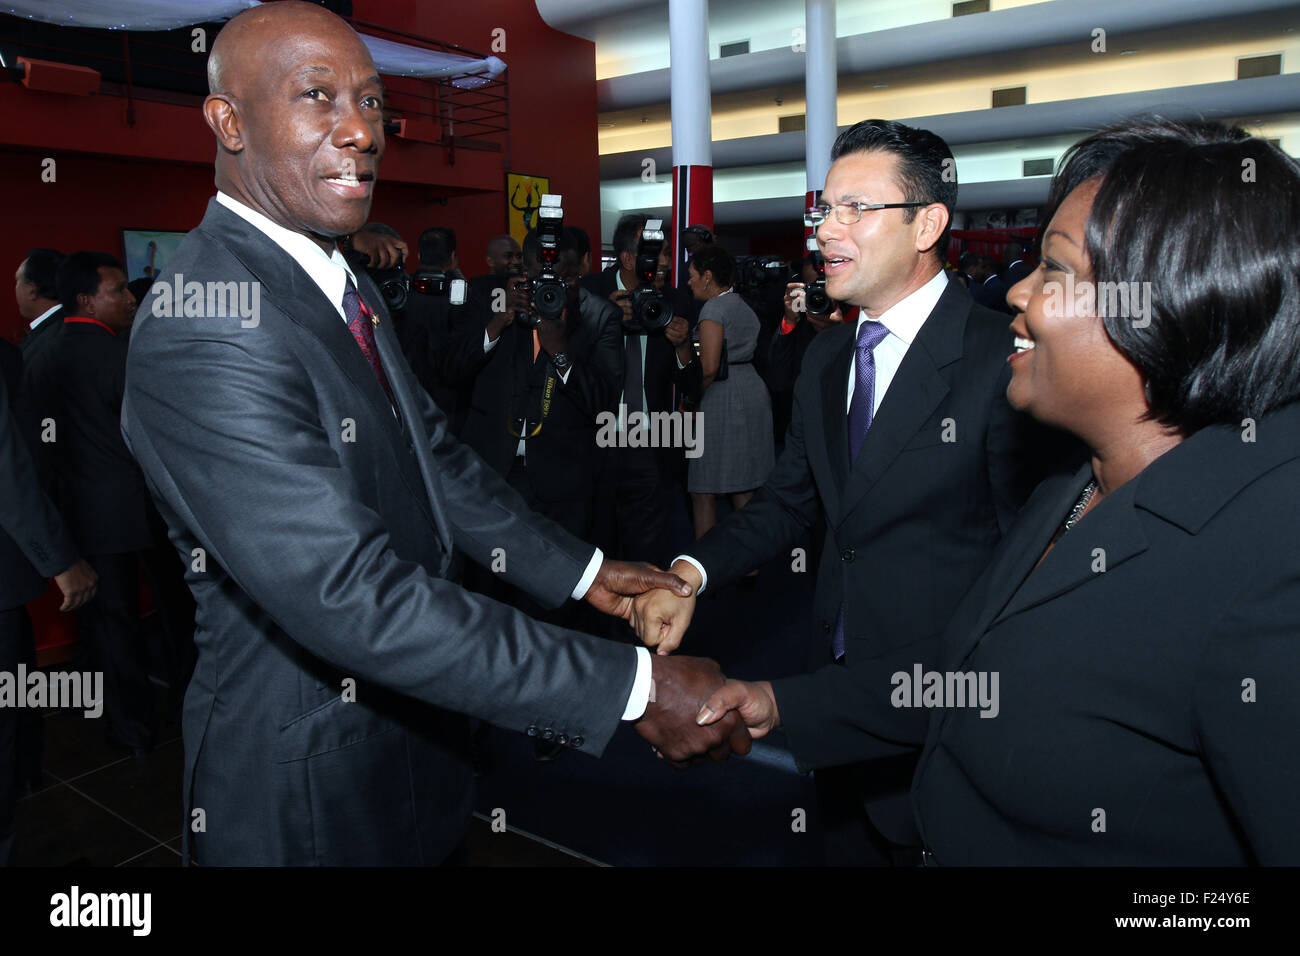 Port of Spain, Trinidad. 11th Sept, 2015. Keith Christopher Rowley (L), Prime Minister of Trinidad & Tobago, greets supporters after the swearing-in ceremony for Ministers of Government at Queen's Hall in Port of Spain, Trinidad on September 11, 2015. Credit:  SEAN DRAKES/Alamy Live News Stock Photo